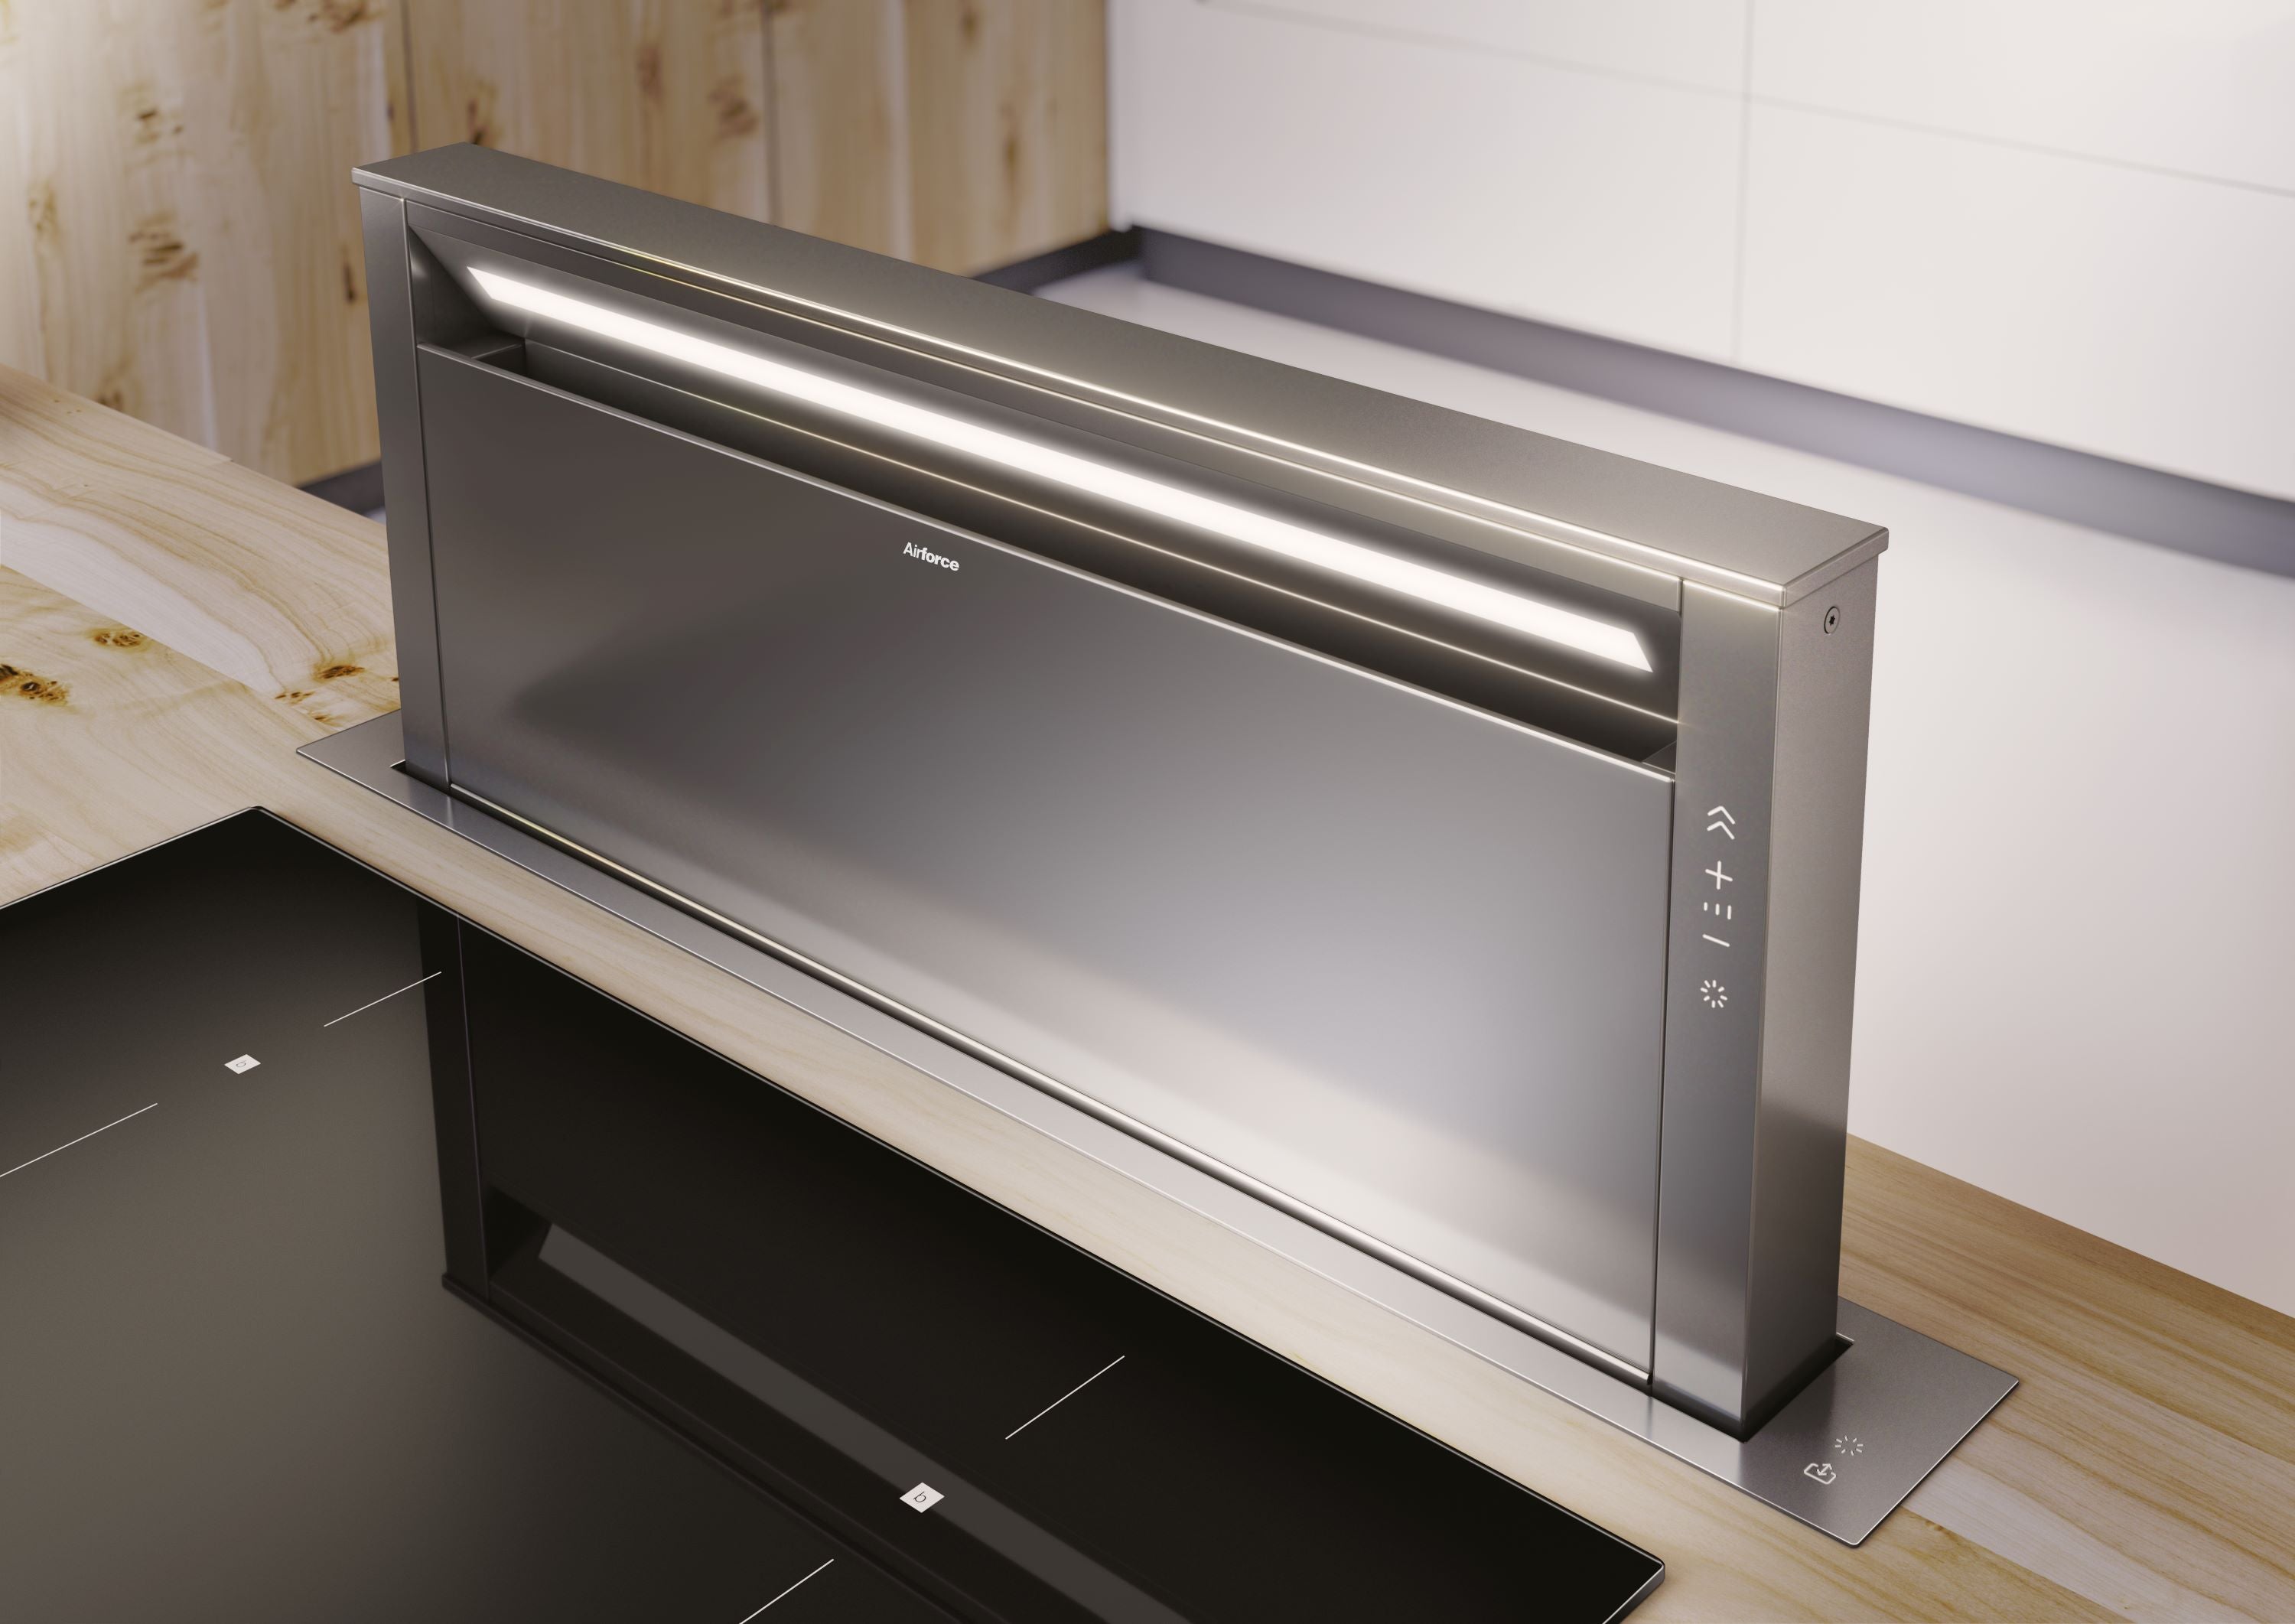 Airforce Downdraft 86cm POP-UP Cooker Hood in Inox Finish